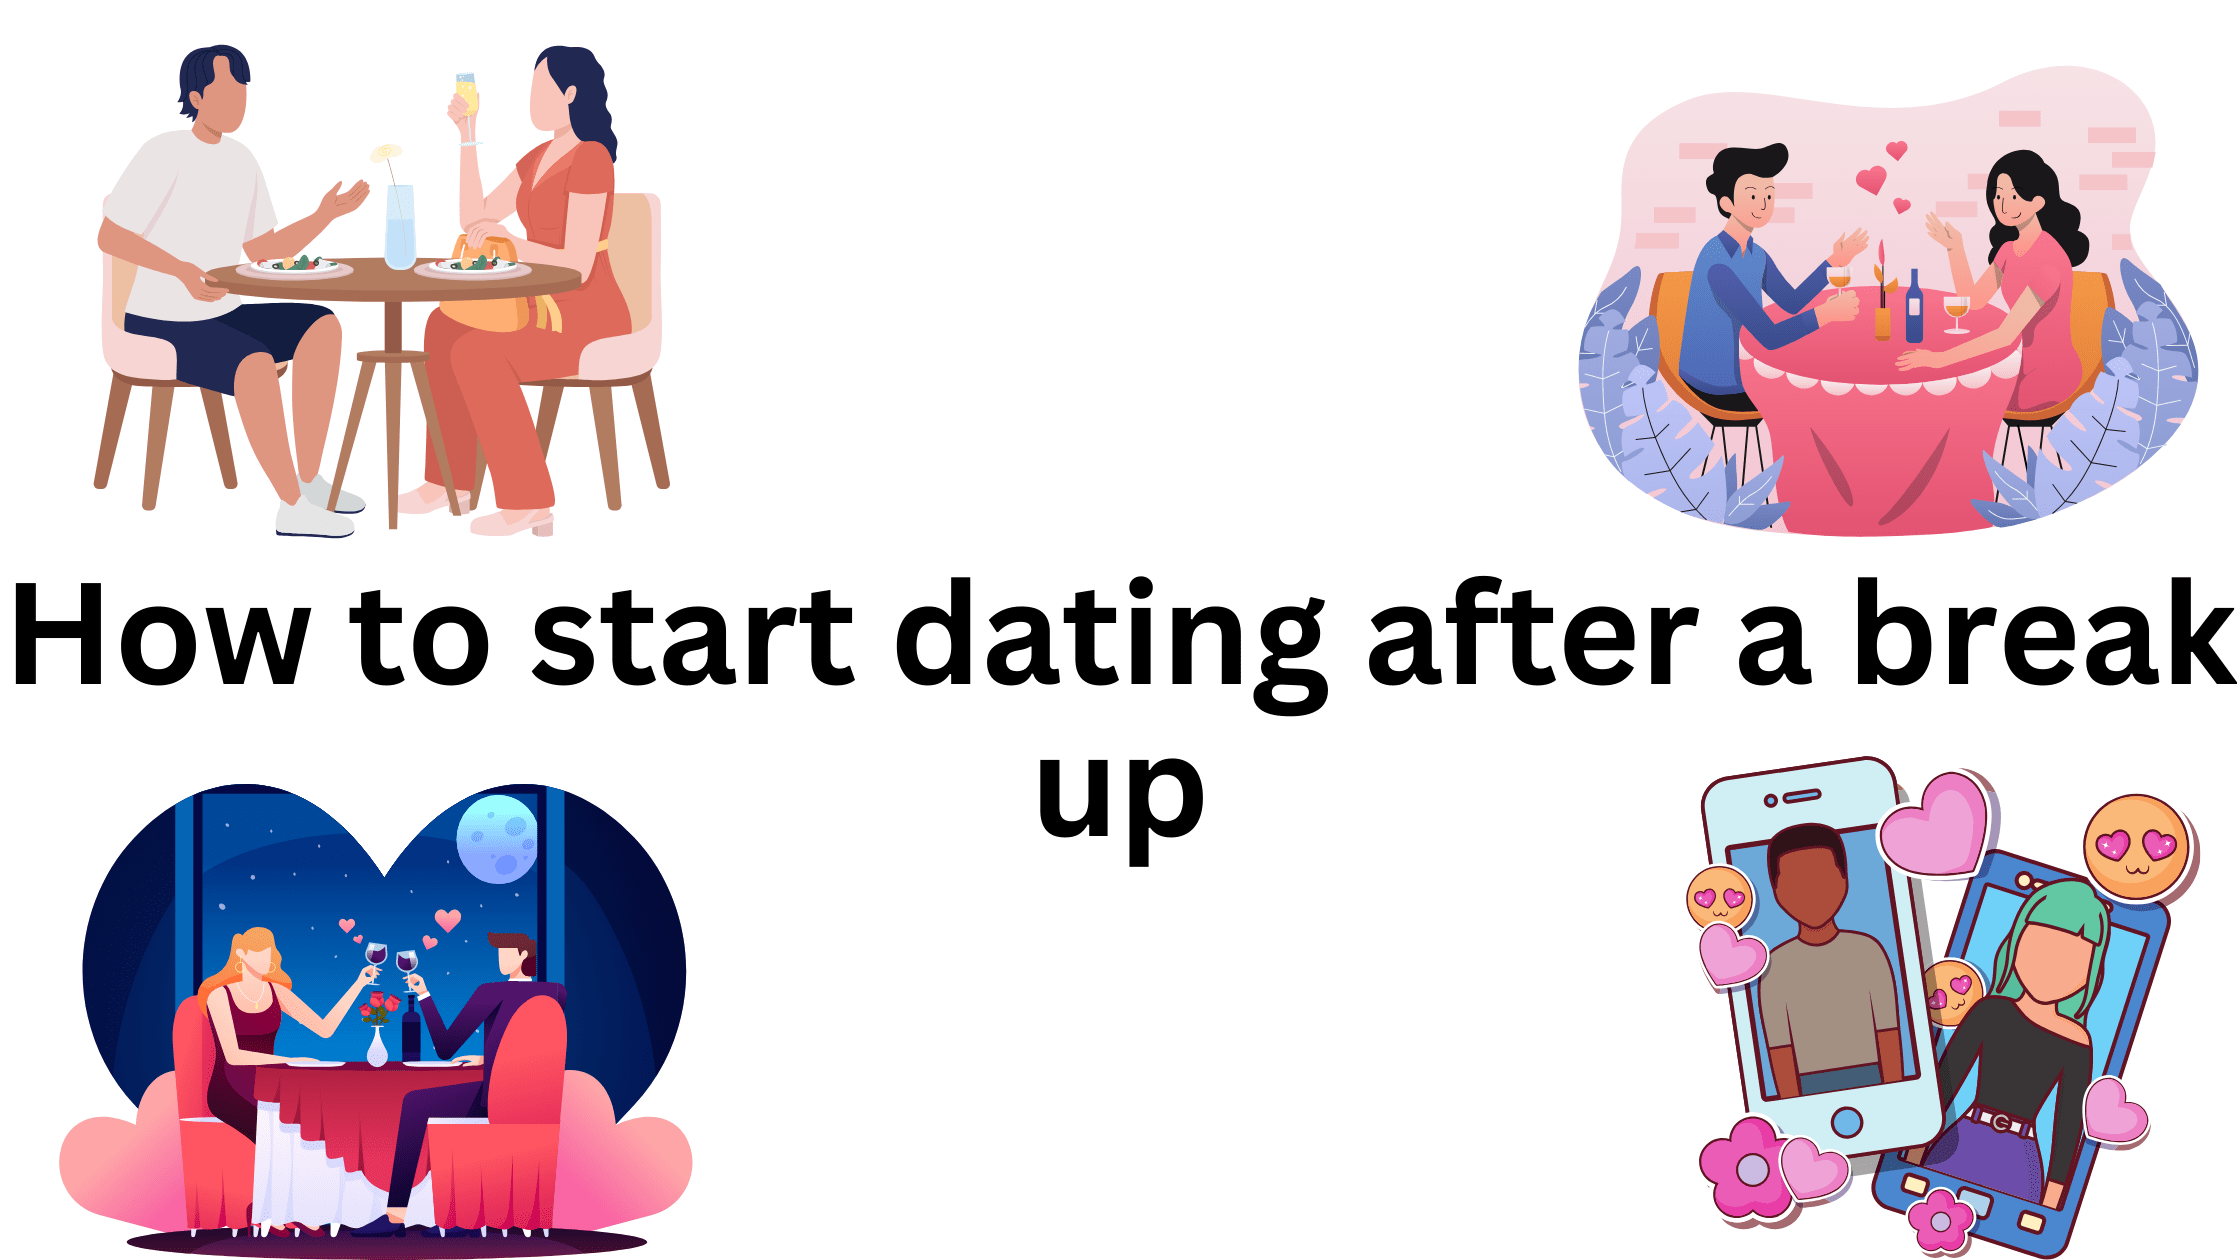 10 Great Ways to Start Dating After a Break Up 4